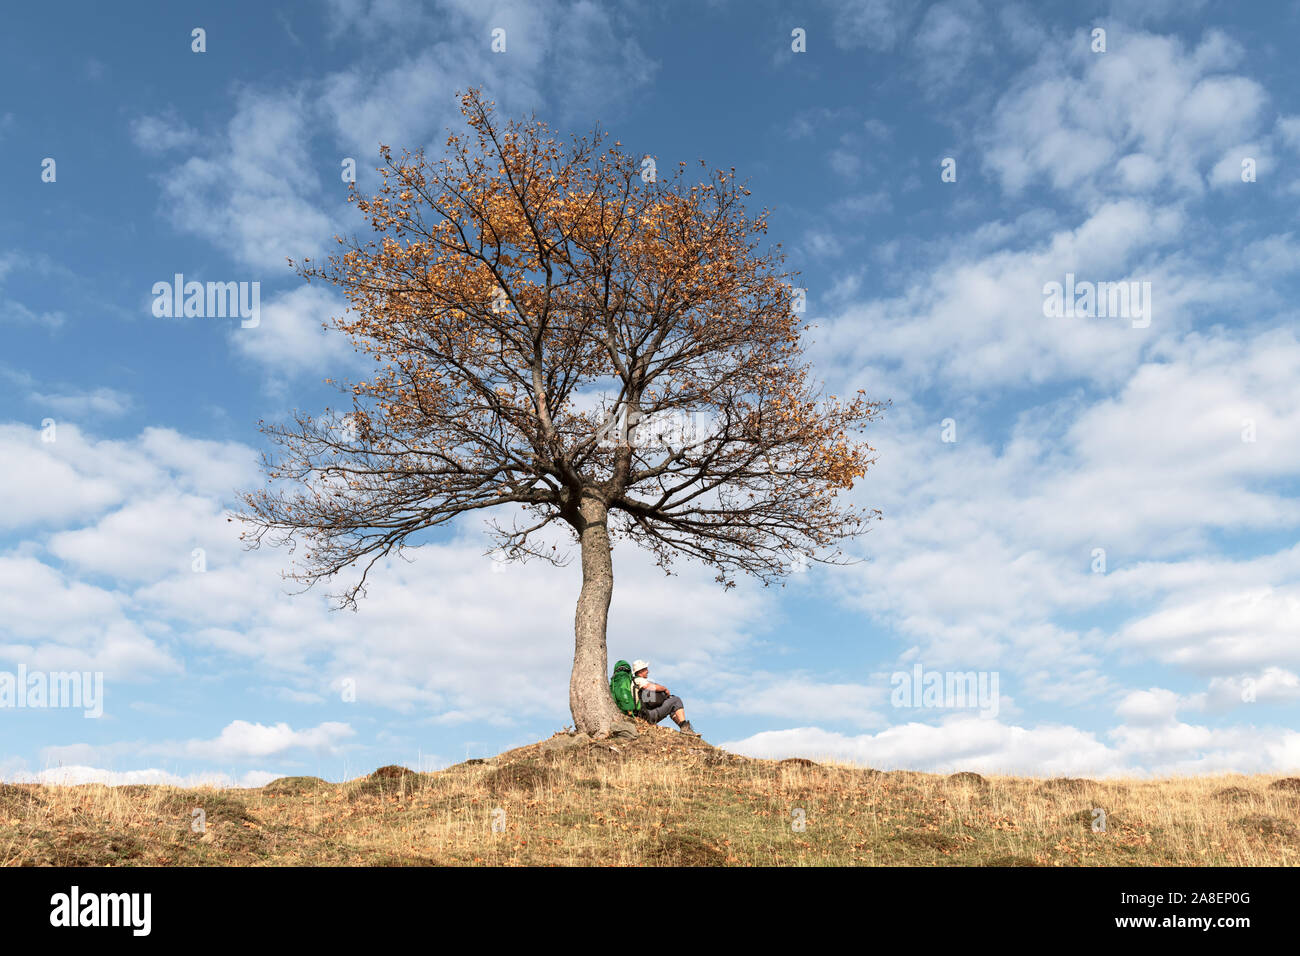 Tourist sitting under majestic orange tree at autumn mountain valley. Dramatic colorful fall scene with blue cloudy sky. Landscape photography Stock Photo